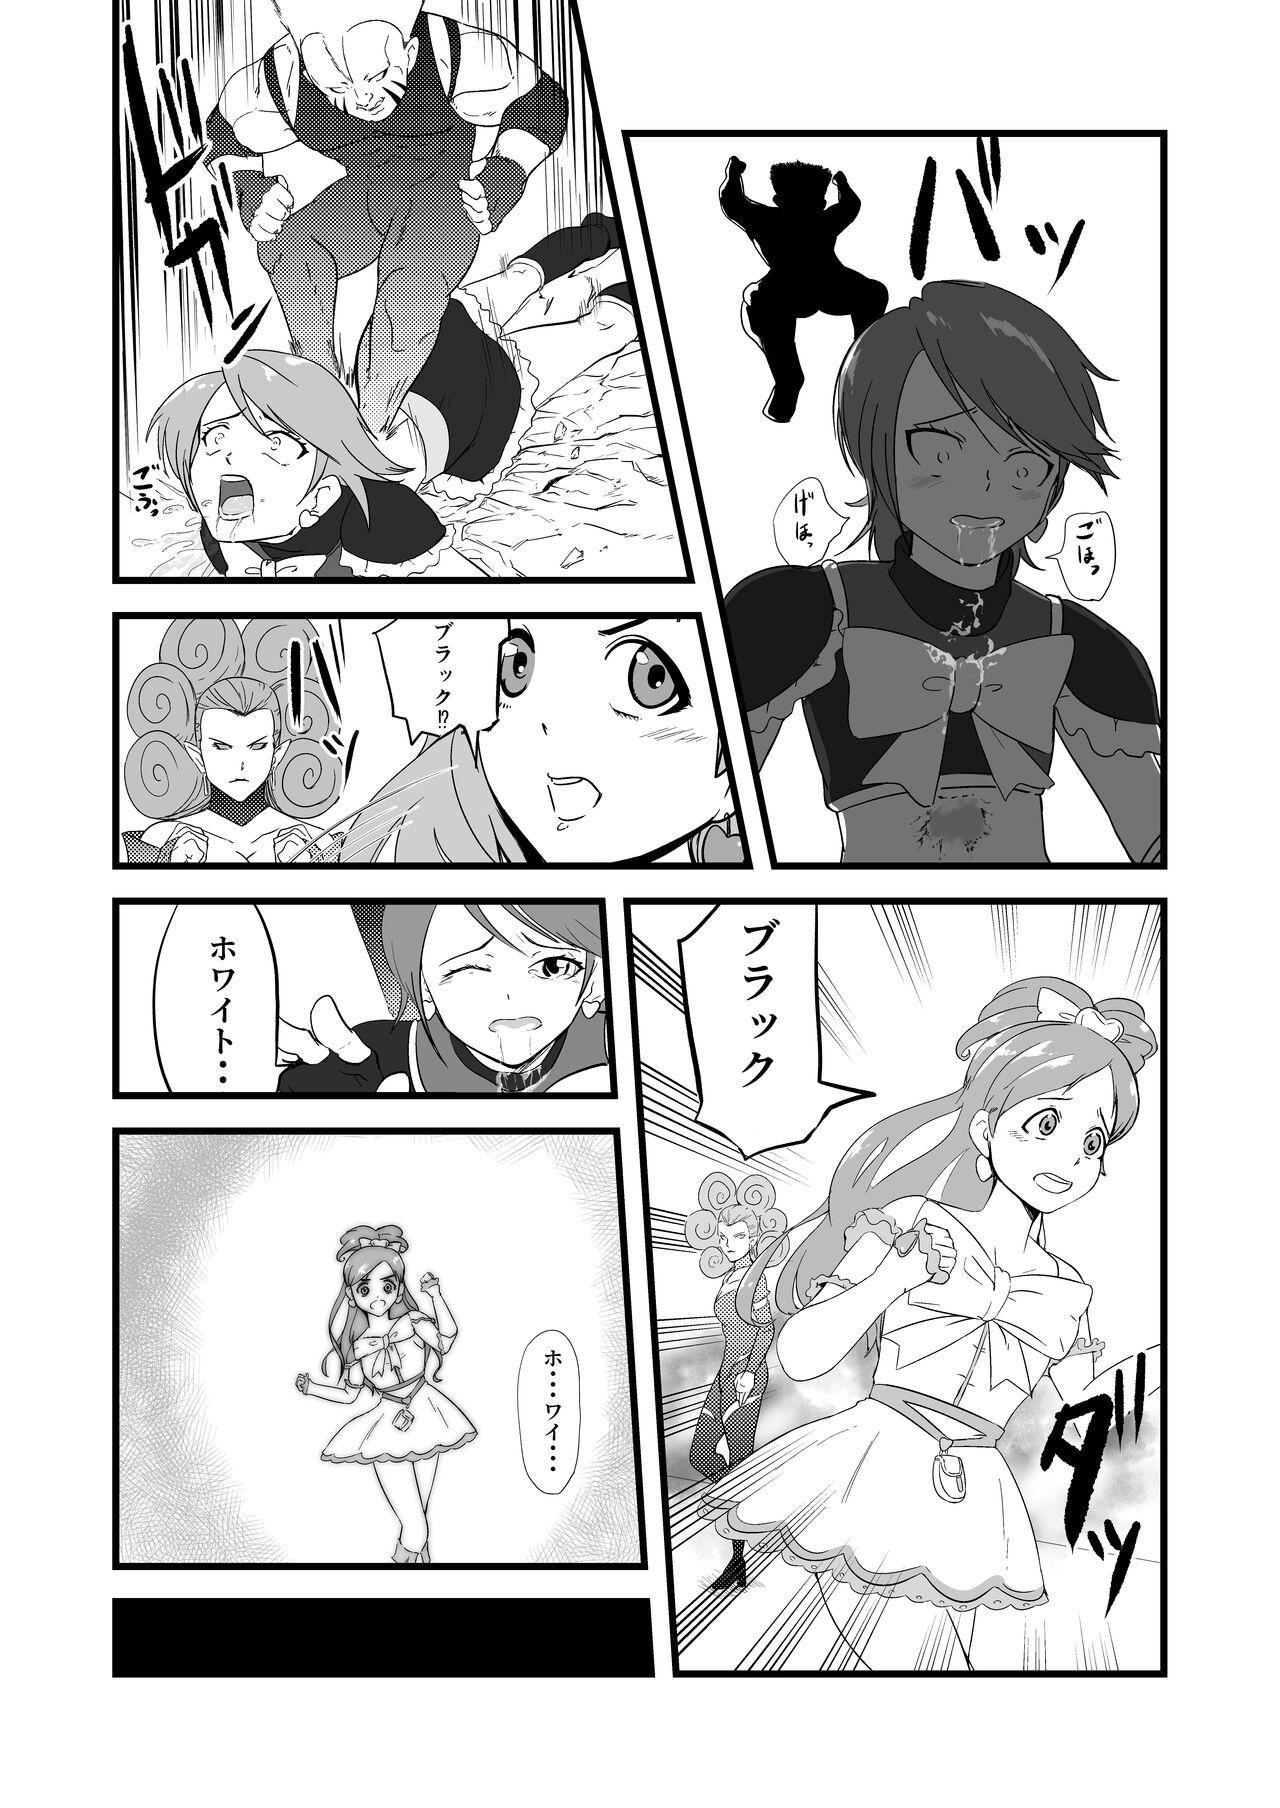 Toys Belly Crisis 7 - Pretty cure Monster - Page 4